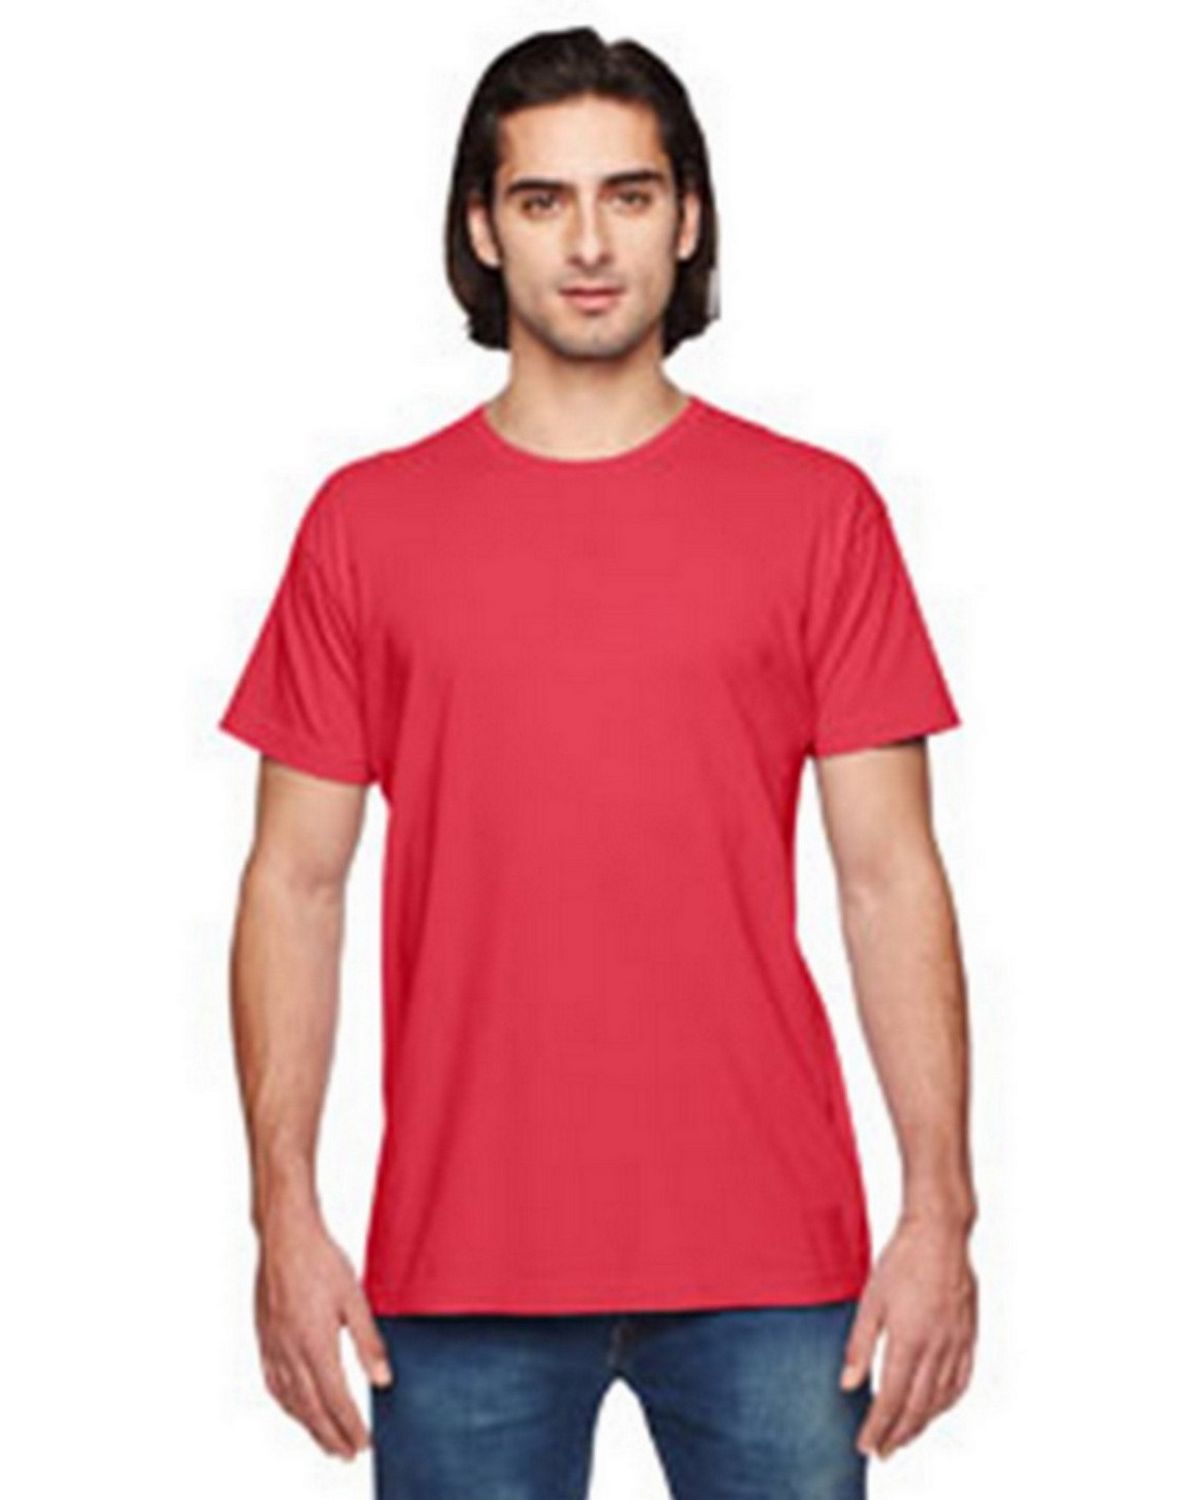 American Apparel 2011 Power Washed Unisex T-Shirt